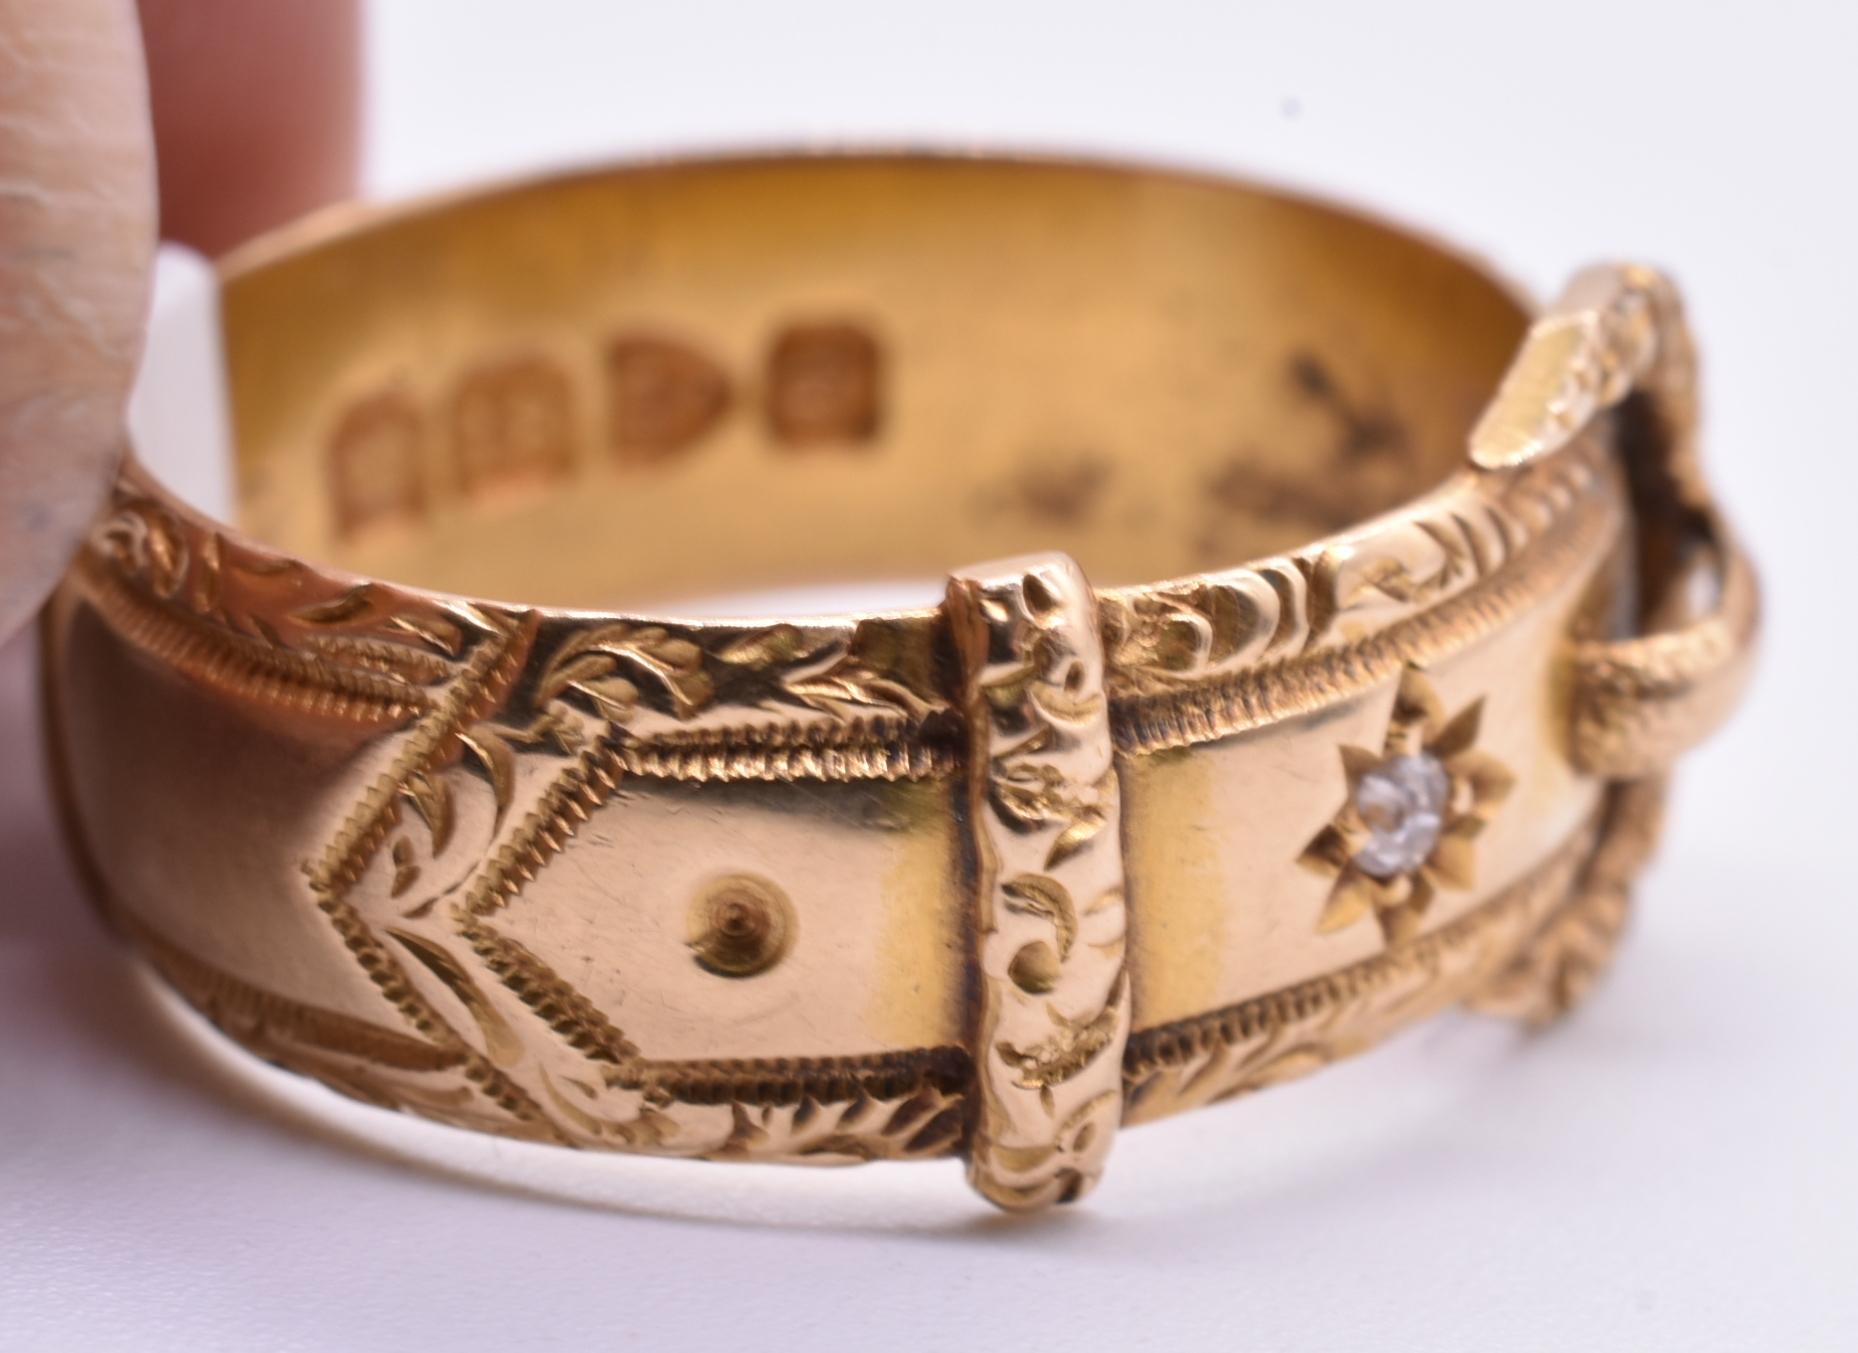 18K gold buckle ring with an etched pointed star which houses a diamond and an ornate border, hallmarked 1899 Chester. Victorian Diamond Buckle Ring.  Buckle imagery was used in the Victorian and Edwardian eras to symbolize fidelity, and eternal